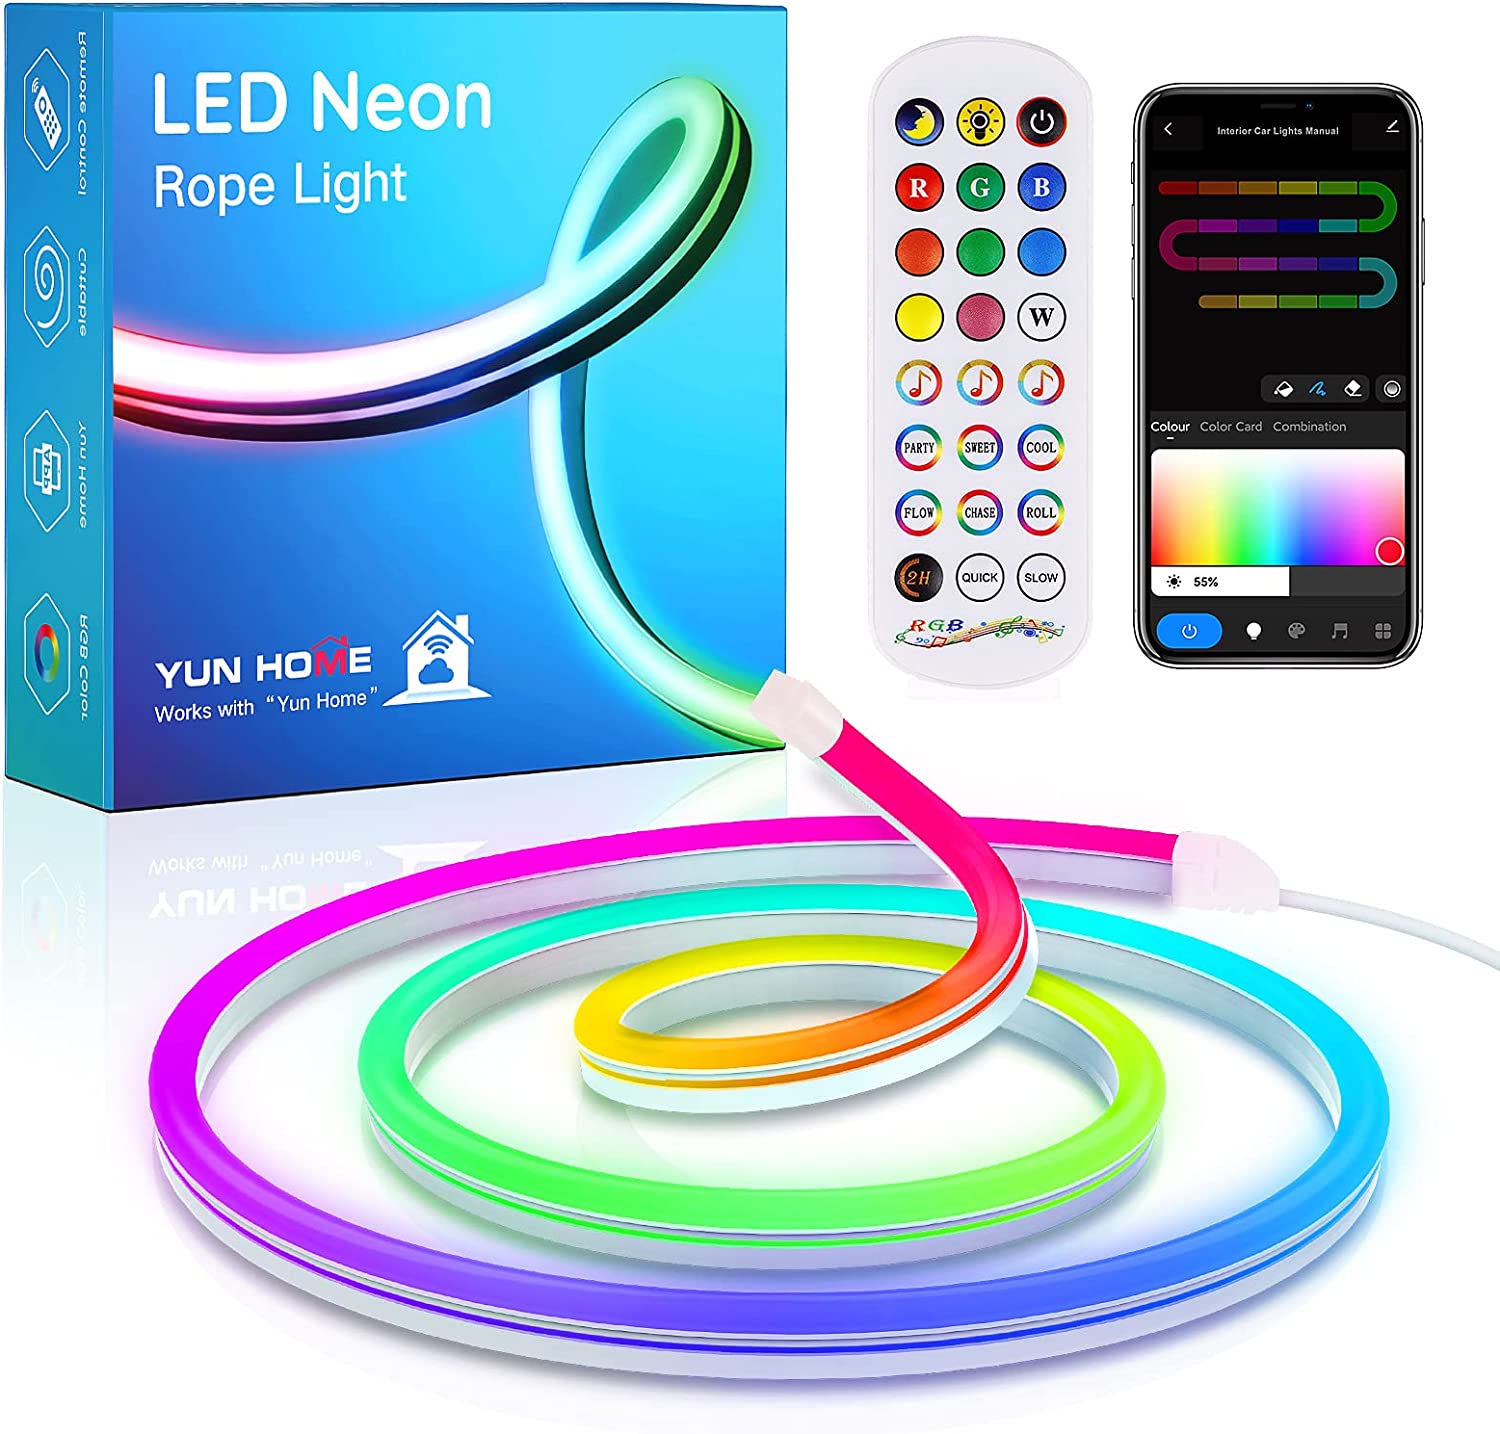 KJOY LED Strip Neon Flexible Rope Light, 11FT/3.5M RGB Neon Rope Lights with App & Remote Control, 12V Cuttable Silicone DIY Creative Neon Rope Lighting Flex Rope for Bedroom Dormitory Kids Room Decor